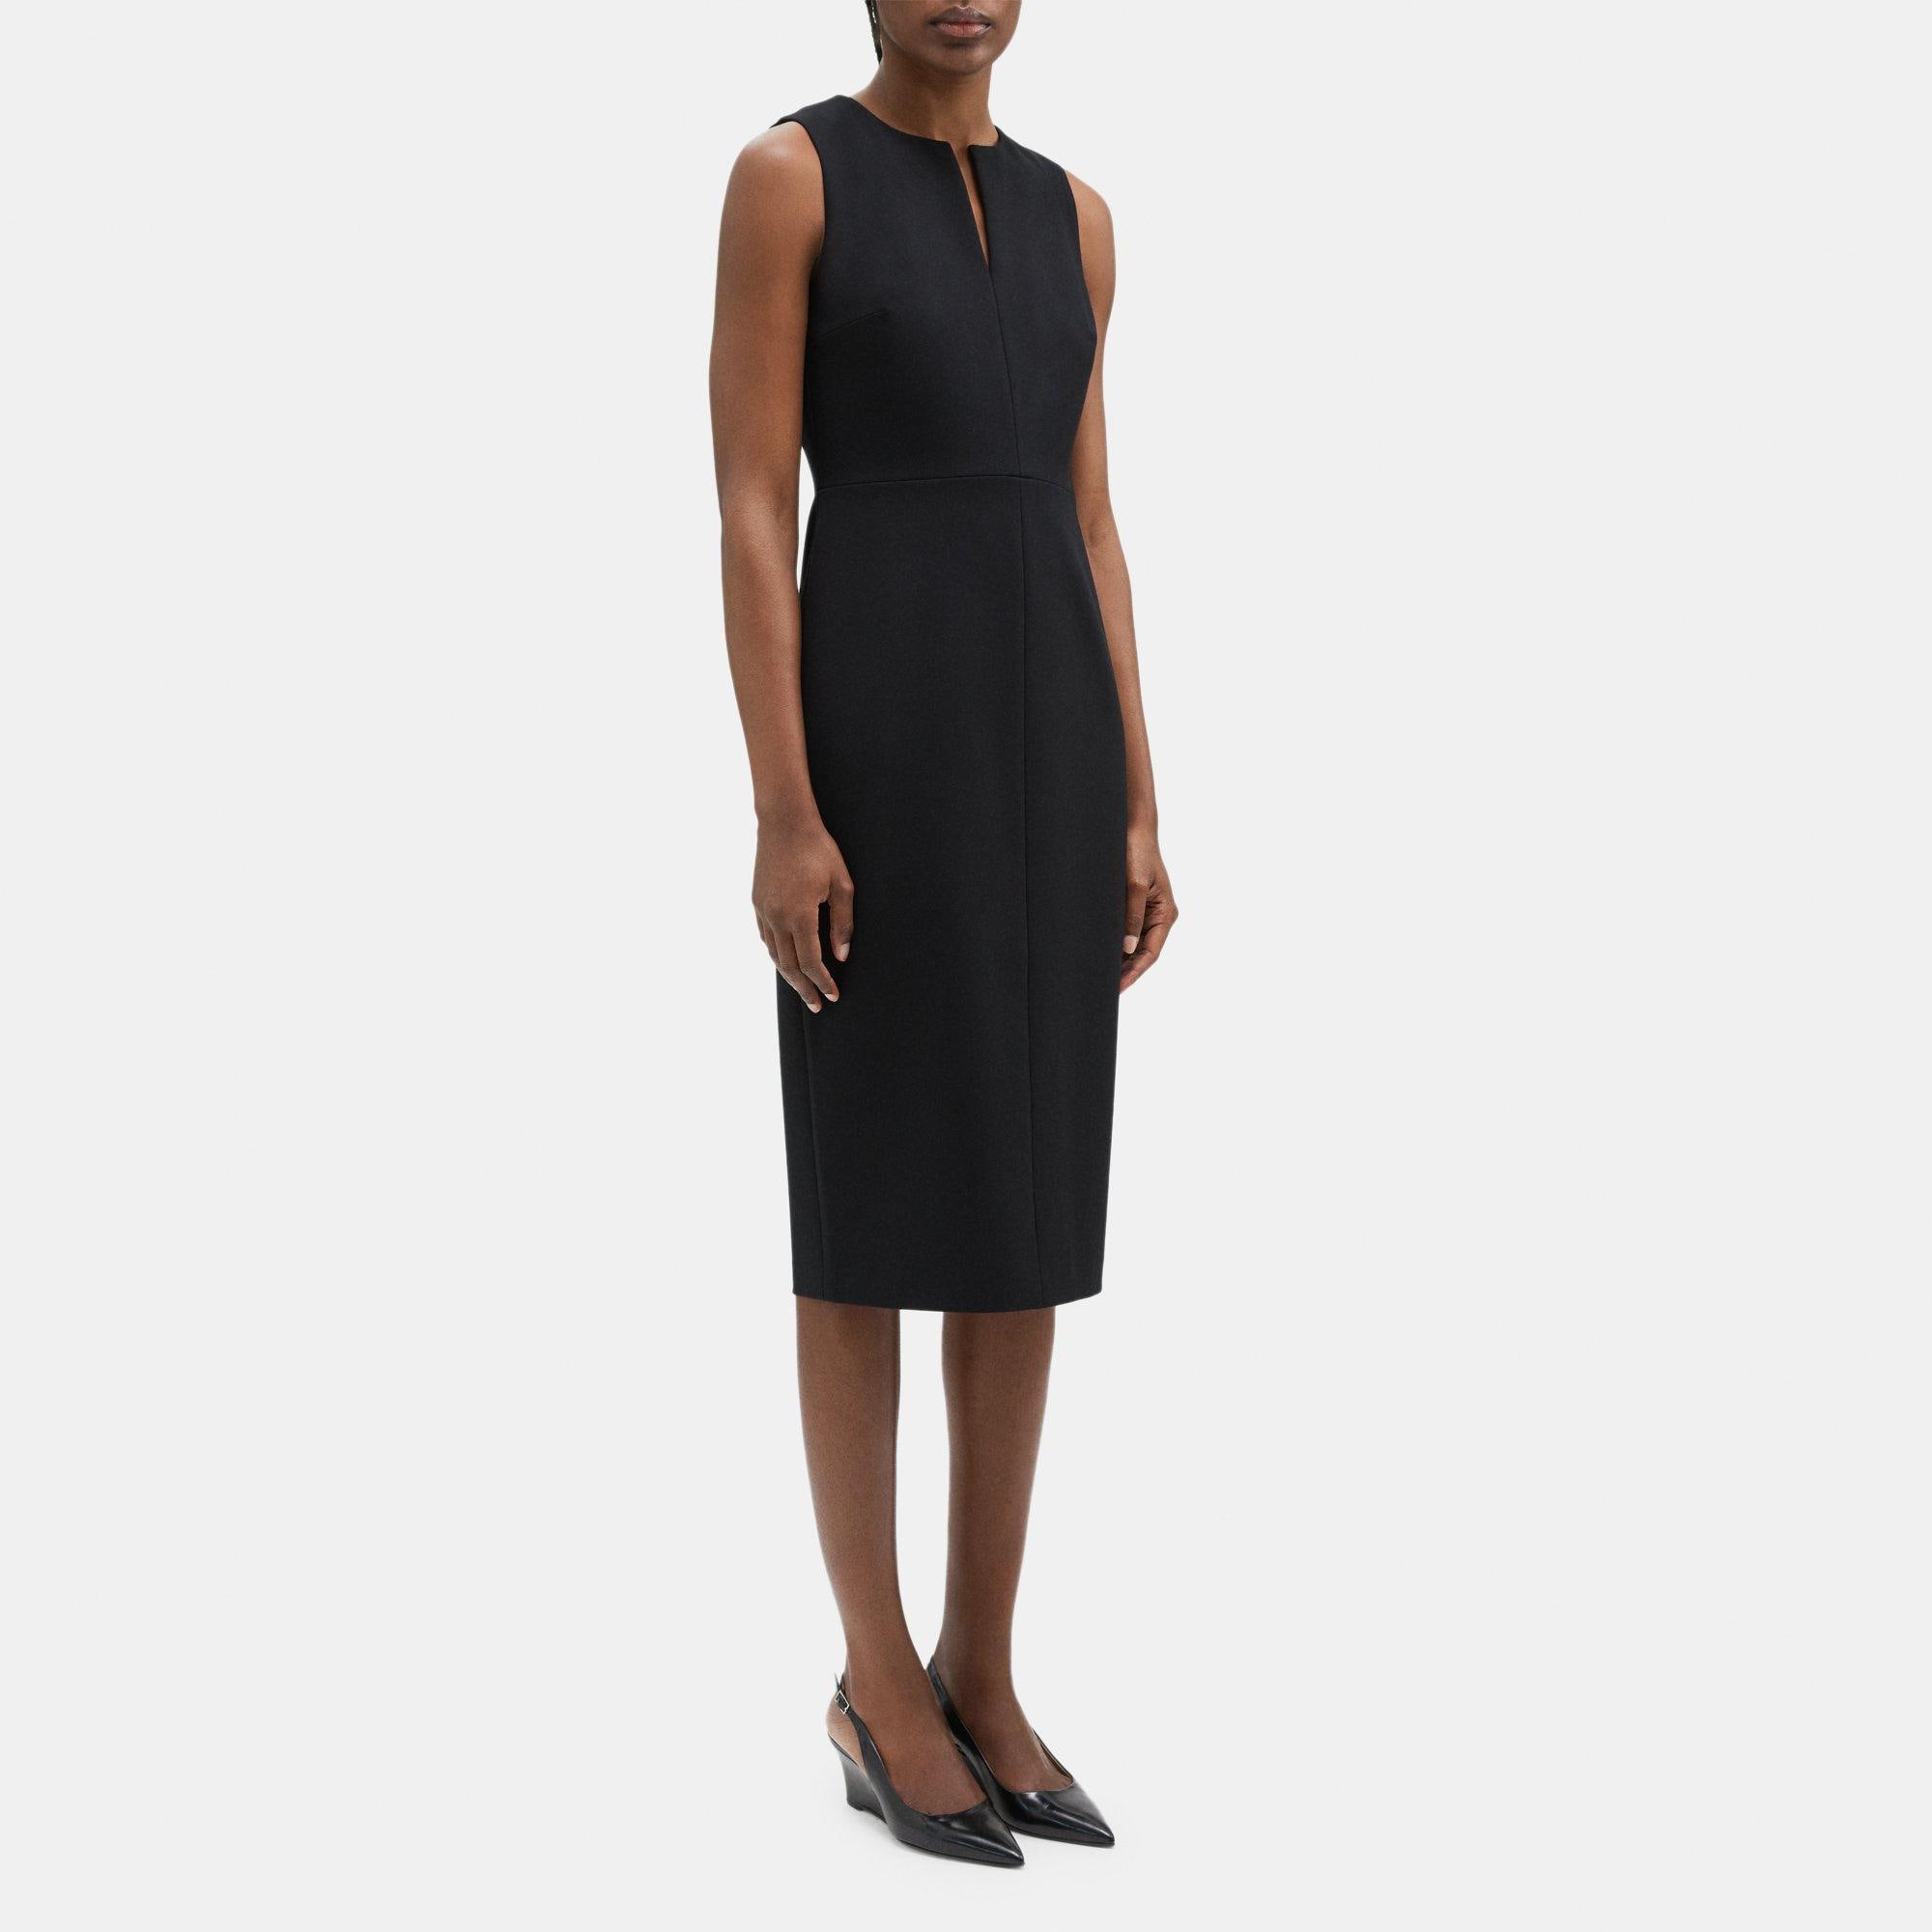 Theory Women's Seam Sculpted Ponte Dress, Black, 0 at